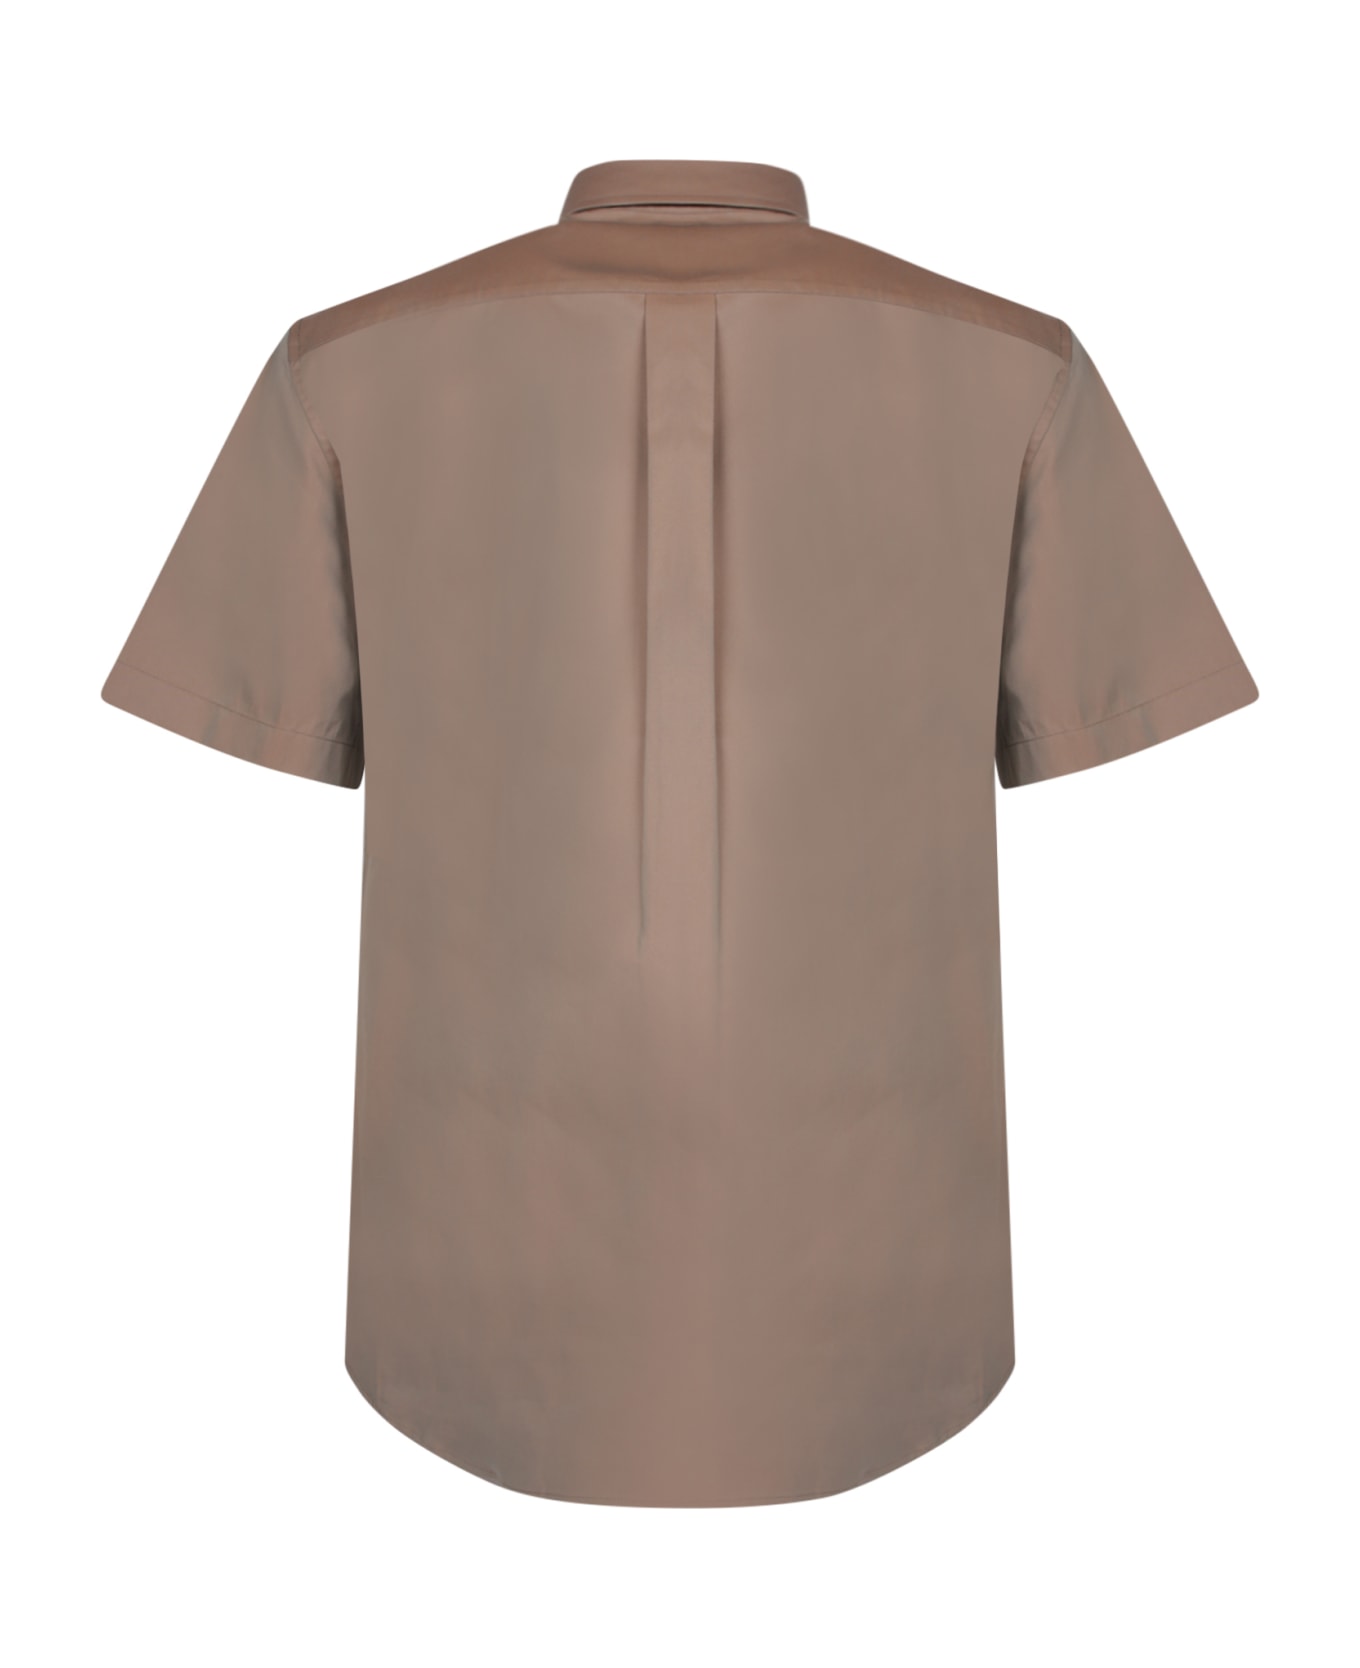 Burberry Shirt In Brown - Brown